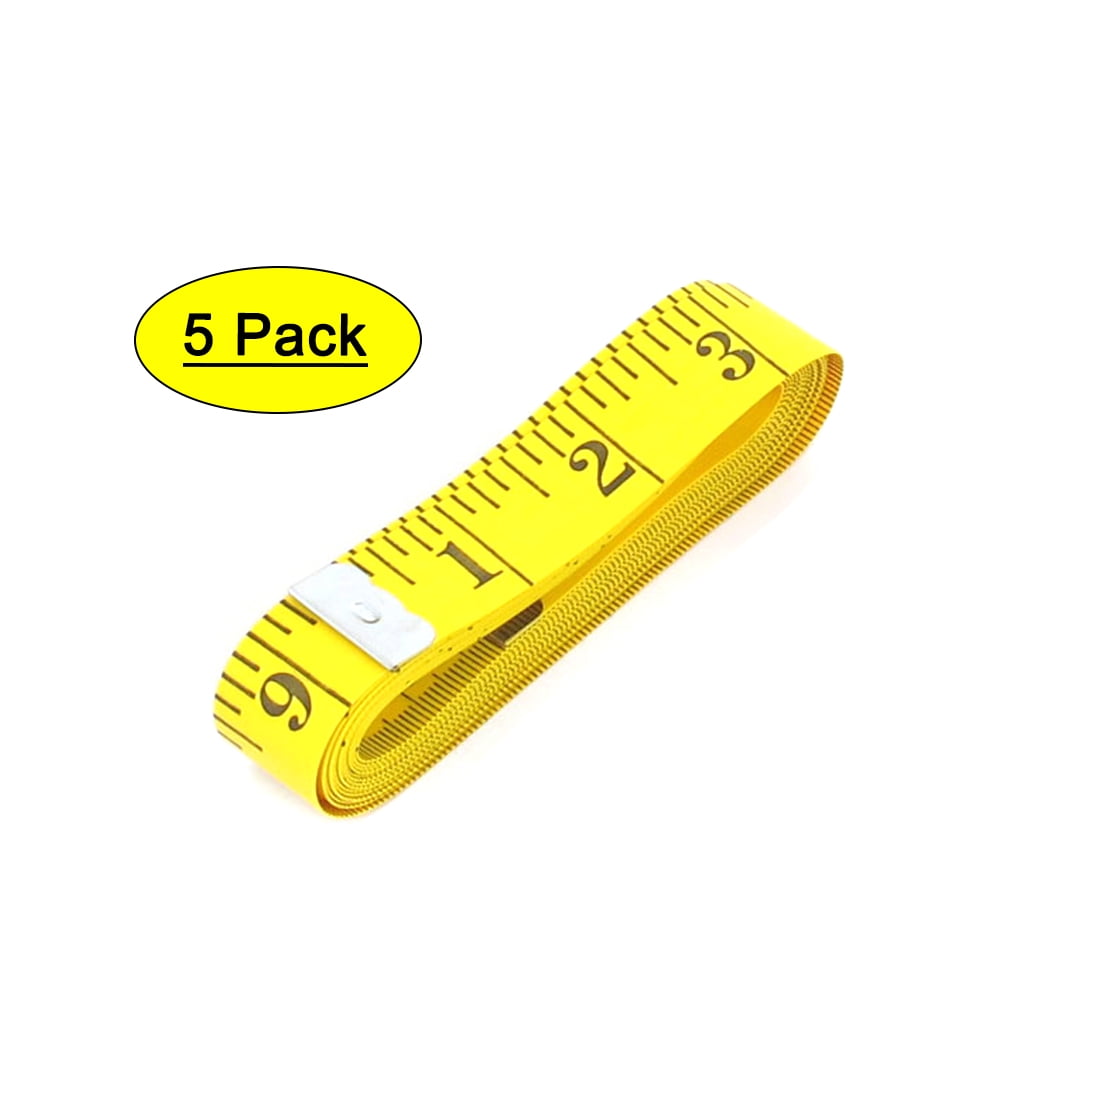 Tailor Seamstress Cloth Body Ruler Tape Measure Sewing SOFT FL 120'' 3Meter 